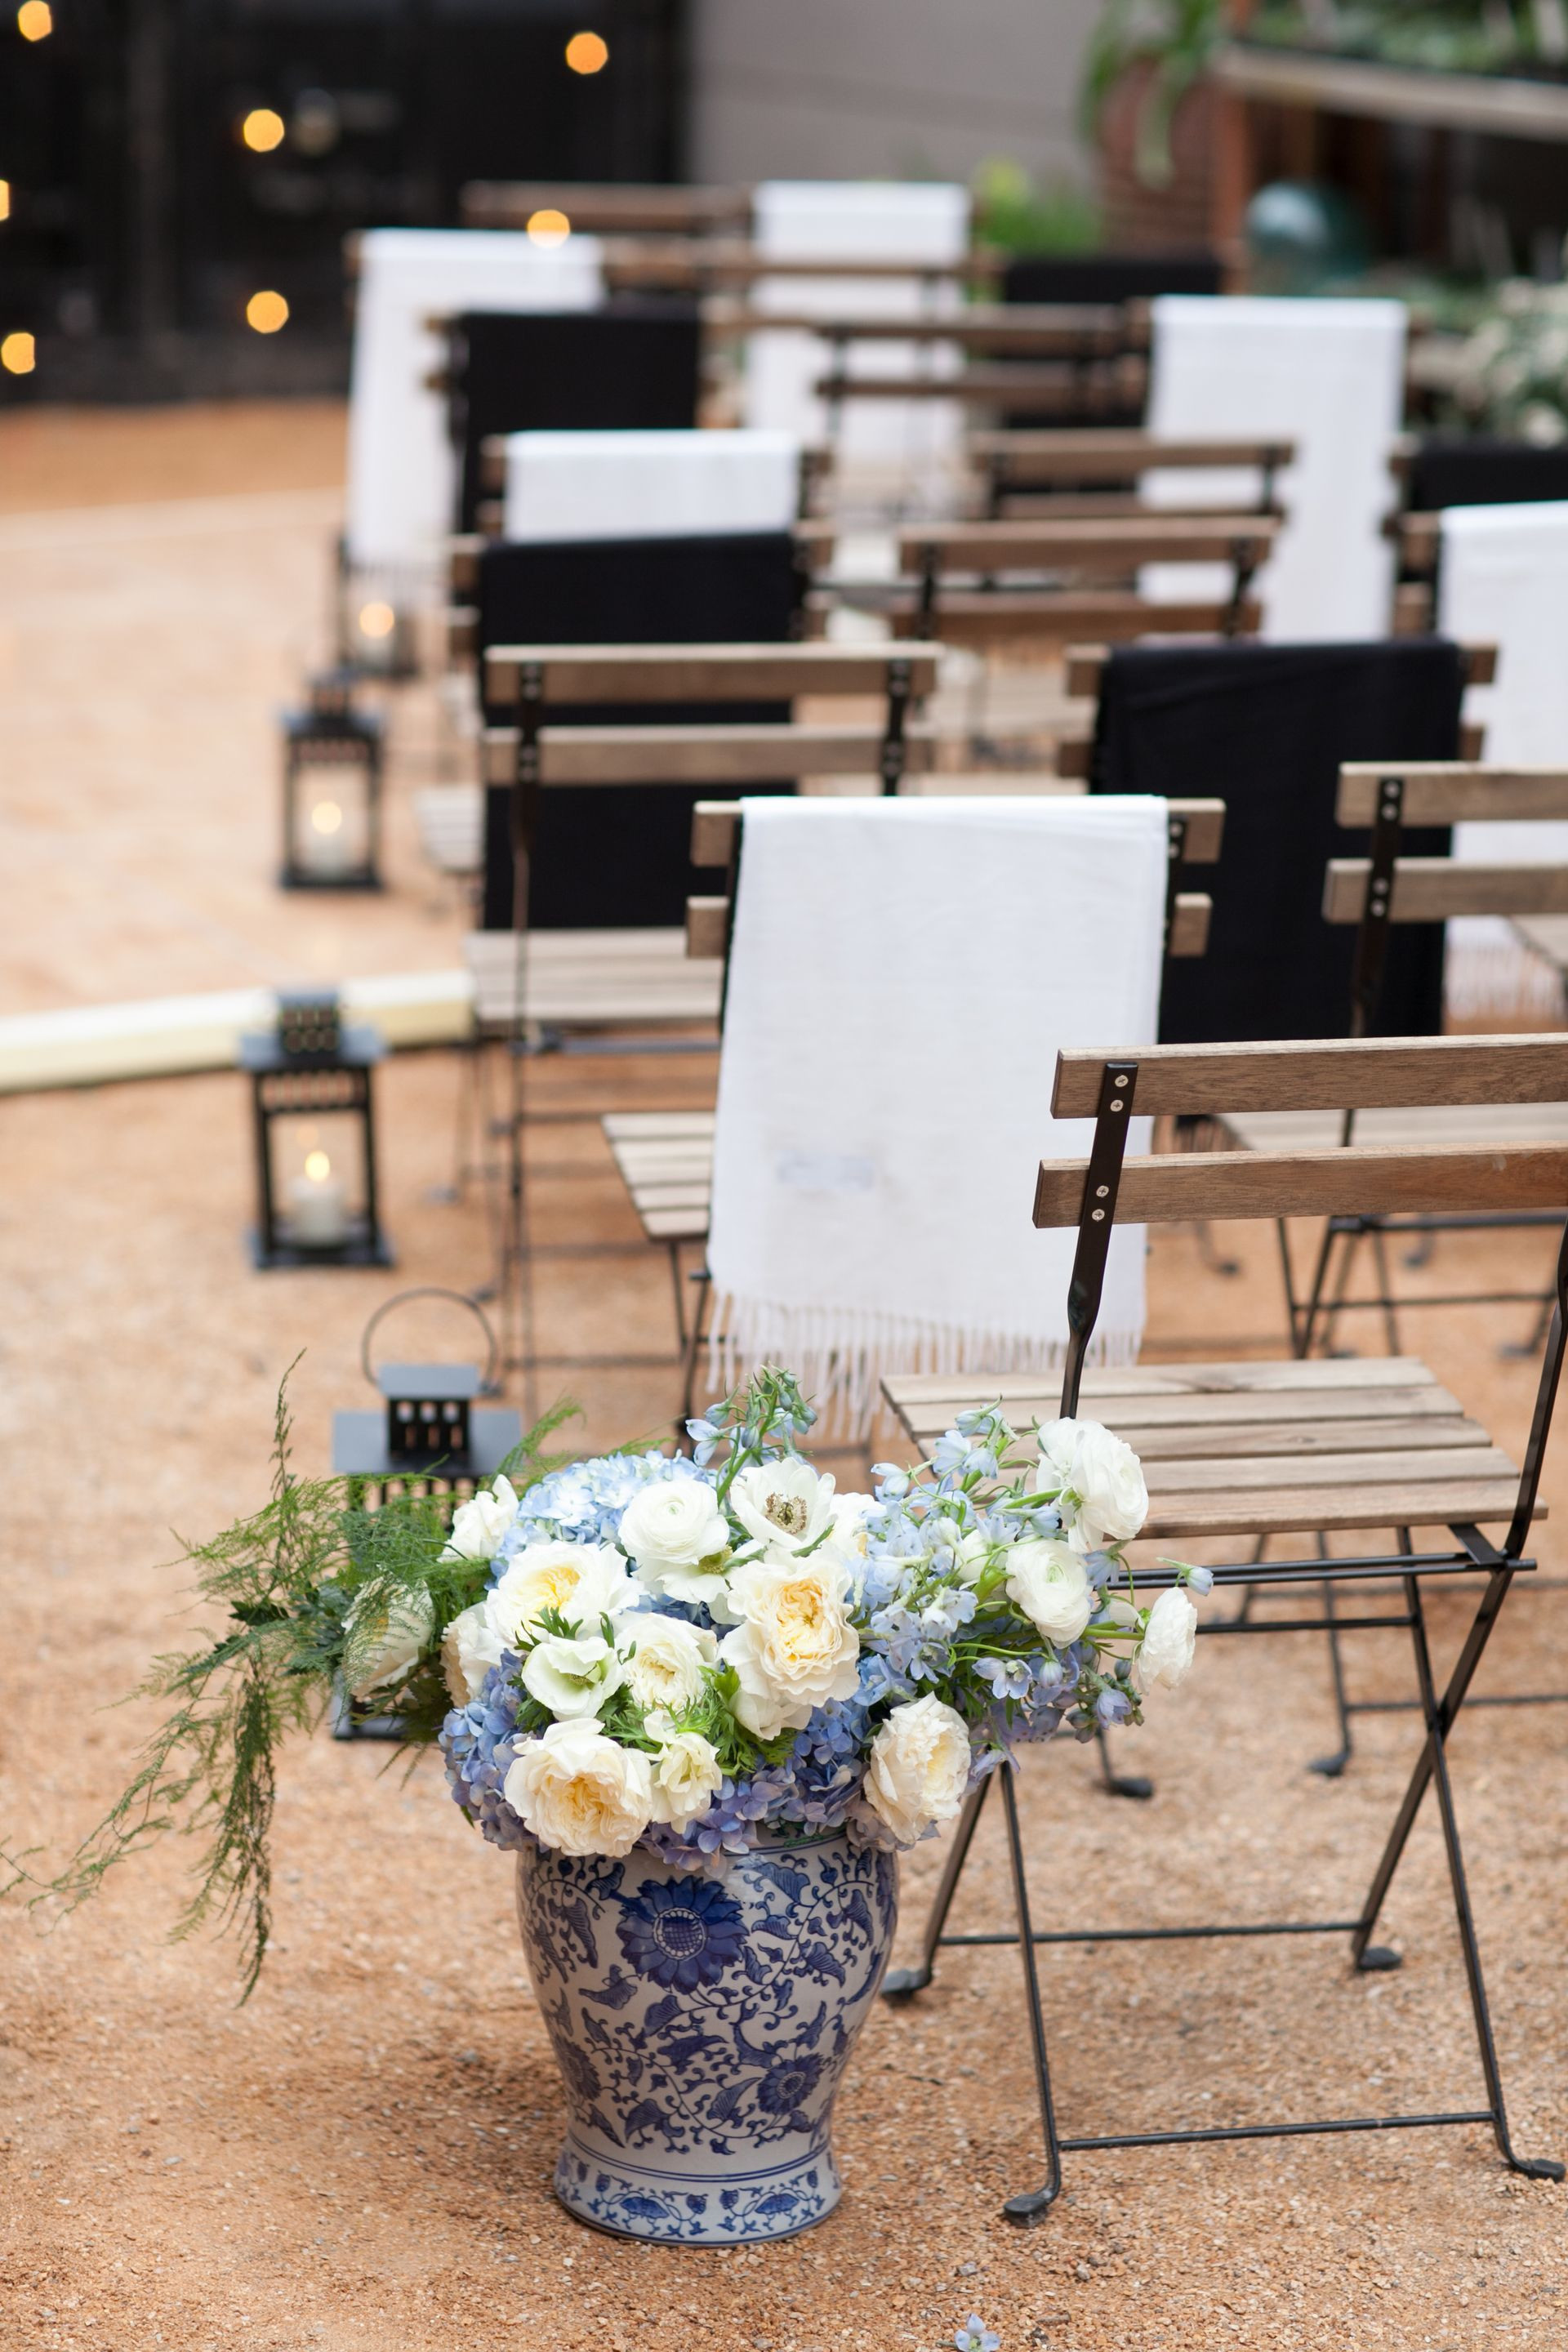 blue vases for centerpieces of the smarter way to wed wedding ceremony ideas pinterest throughout outdoor wintertime wedding ceremony blue china vases cream and blue floral arrangements lanterns down the aisle shawls on chairs julie mikos